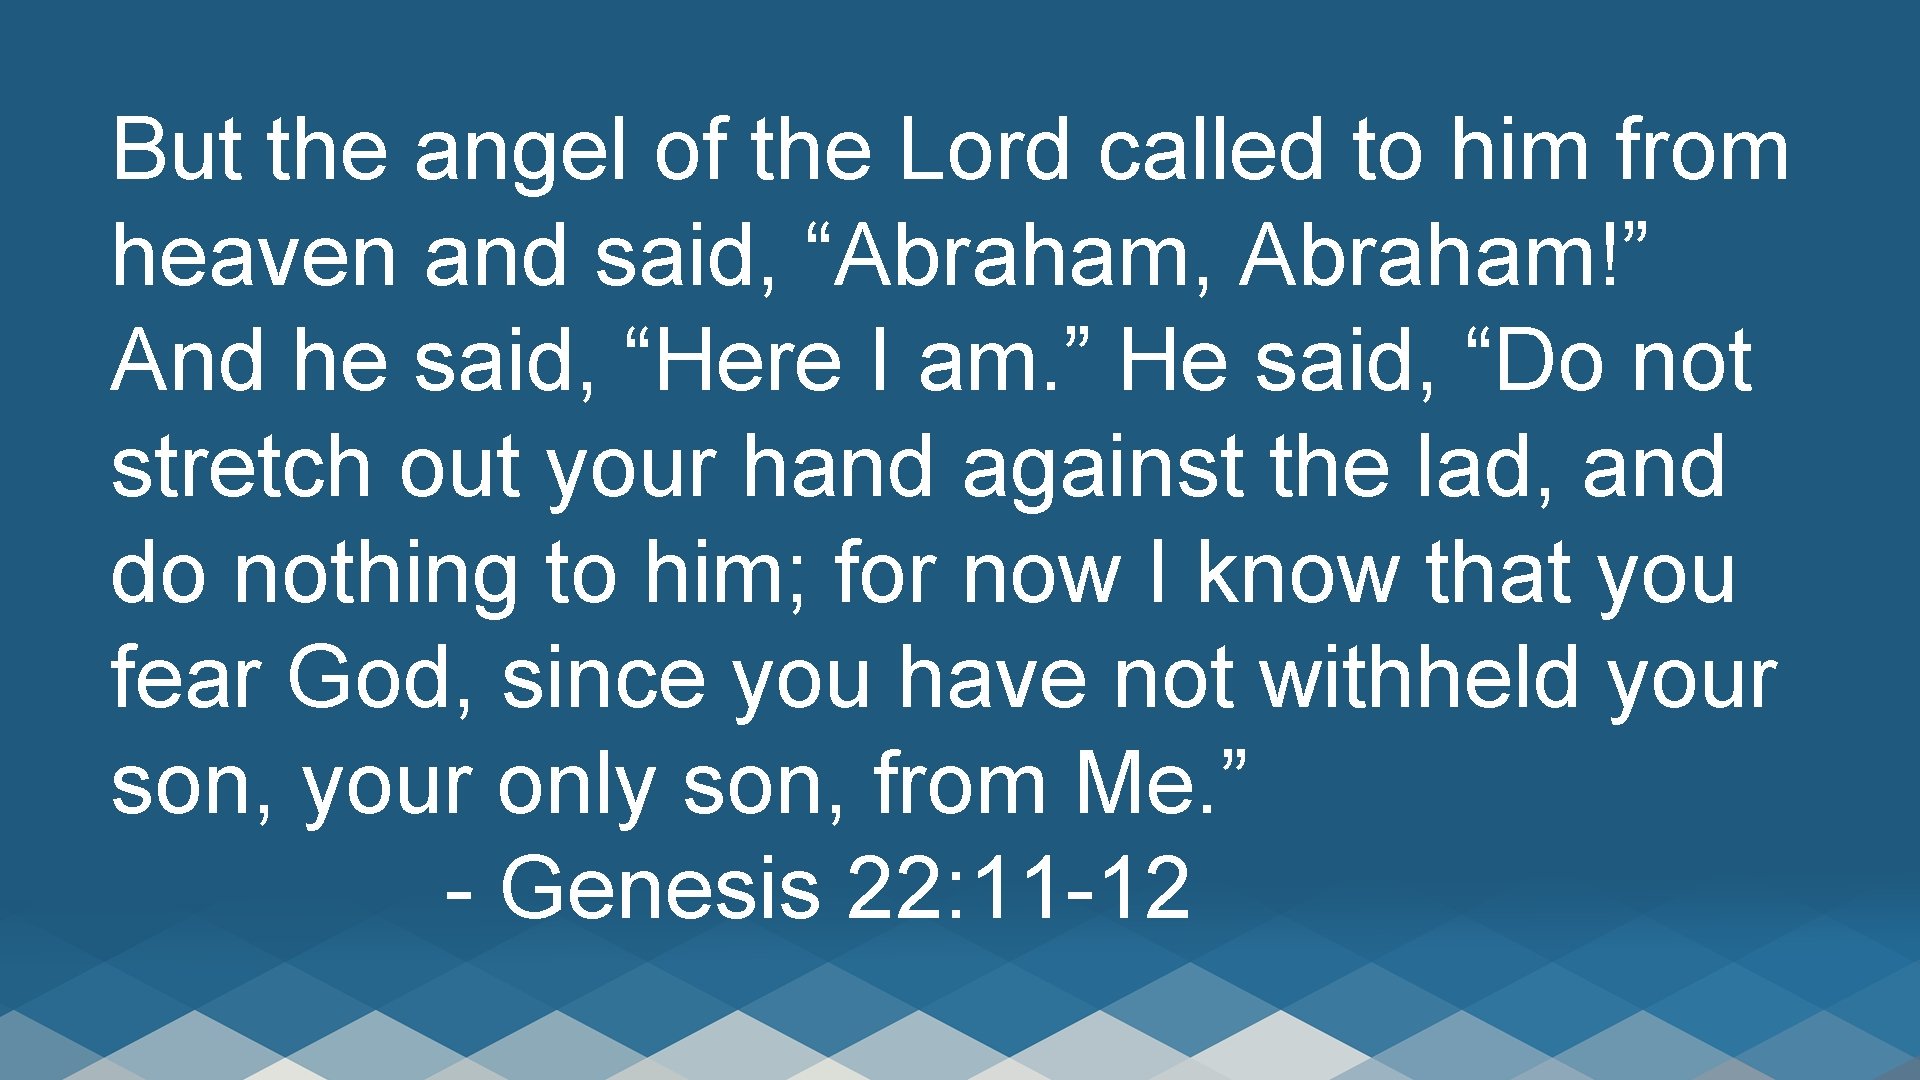 But the angel of the Lord called to him from heaven and said, “Abraham,